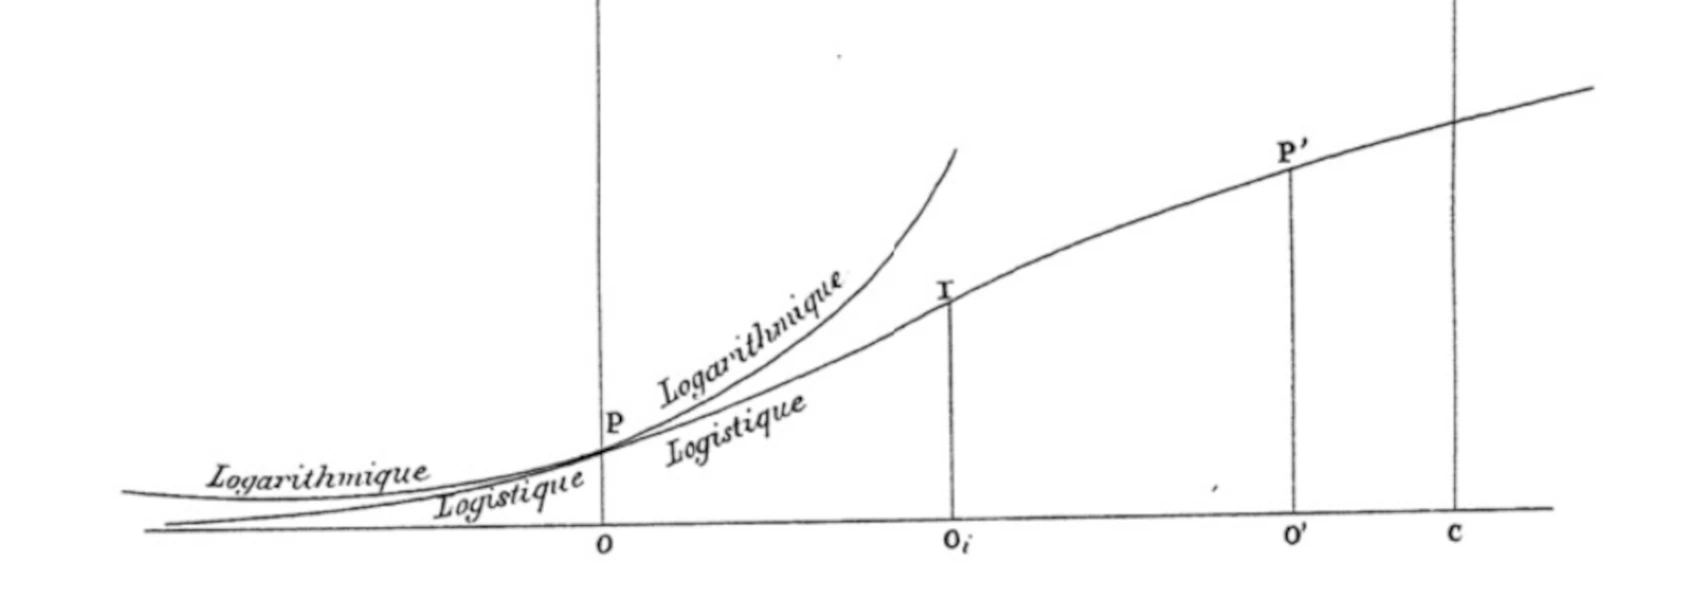 Original image of a logistic curve, contrasted with what Verhulst called a "logarithmic curve" (in modern terms, "exponential curve"). Image adapted from a public domain image curtesy of Wikipedia.